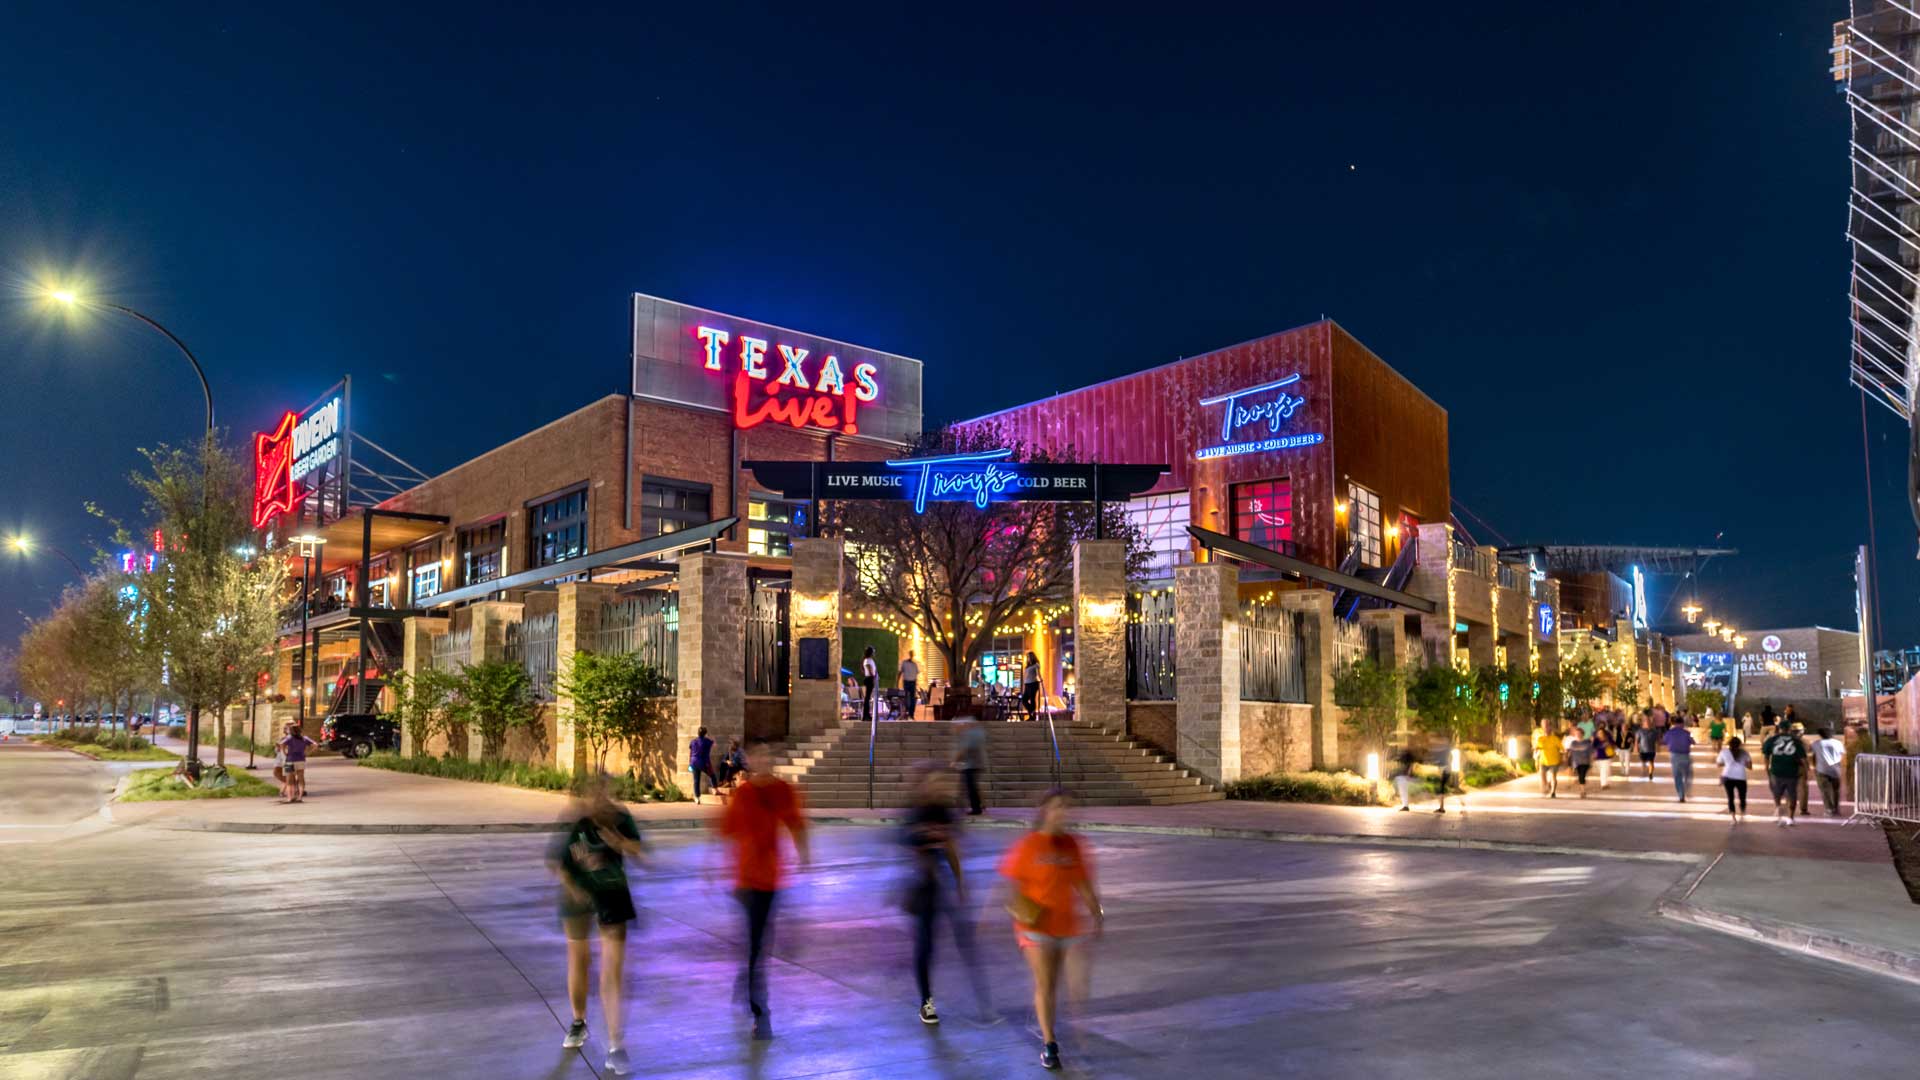 5 essential things to know before you go to Texas Live in